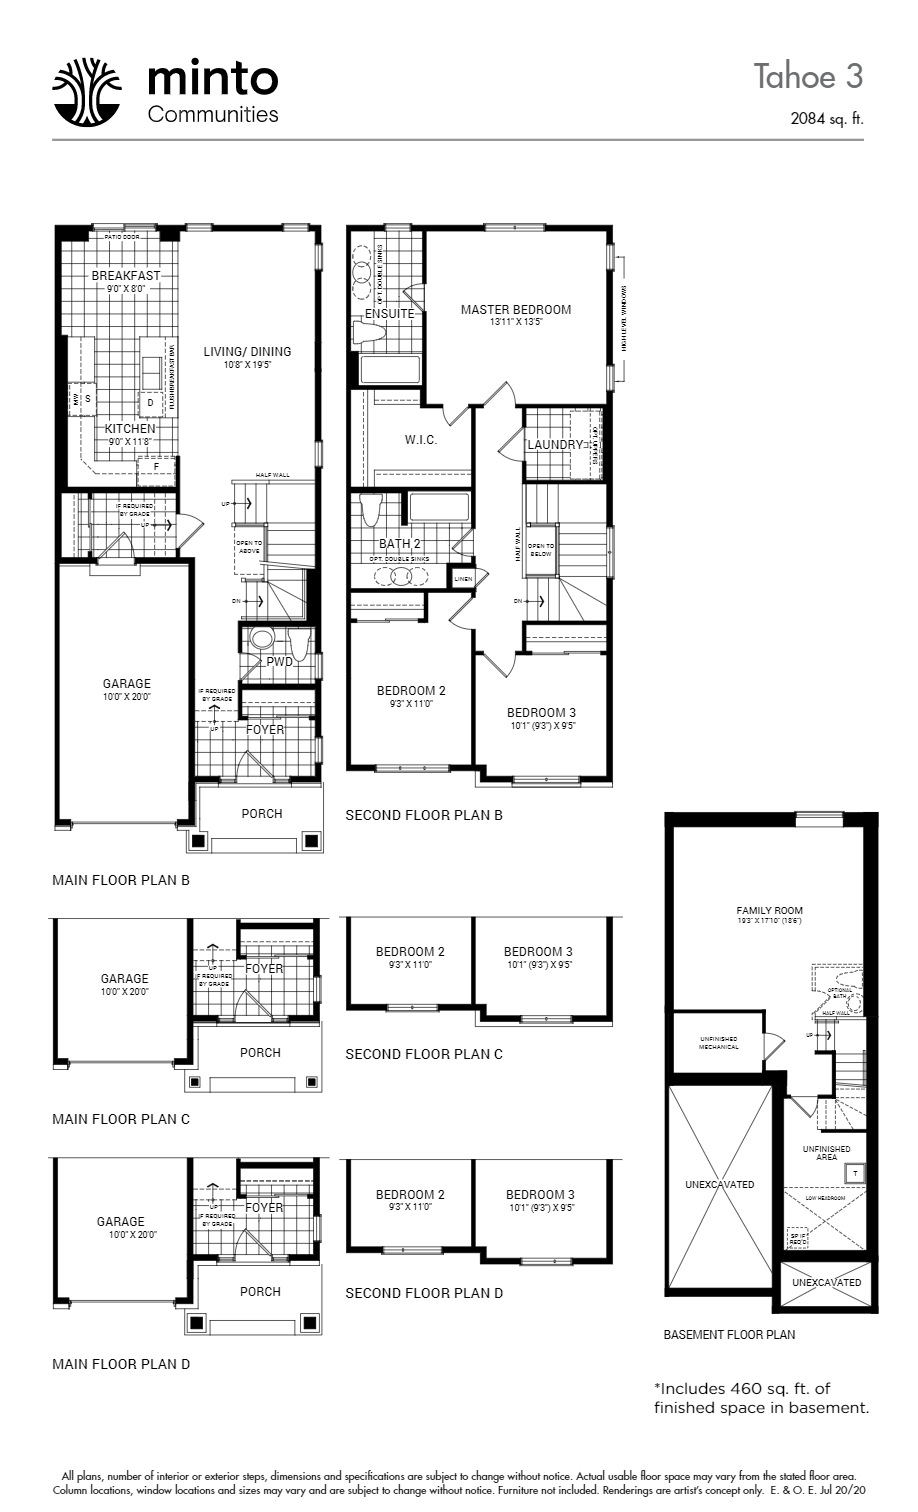 Tahoe End Floor Plan of Avalon Vista by Minto Communities with undefined beds